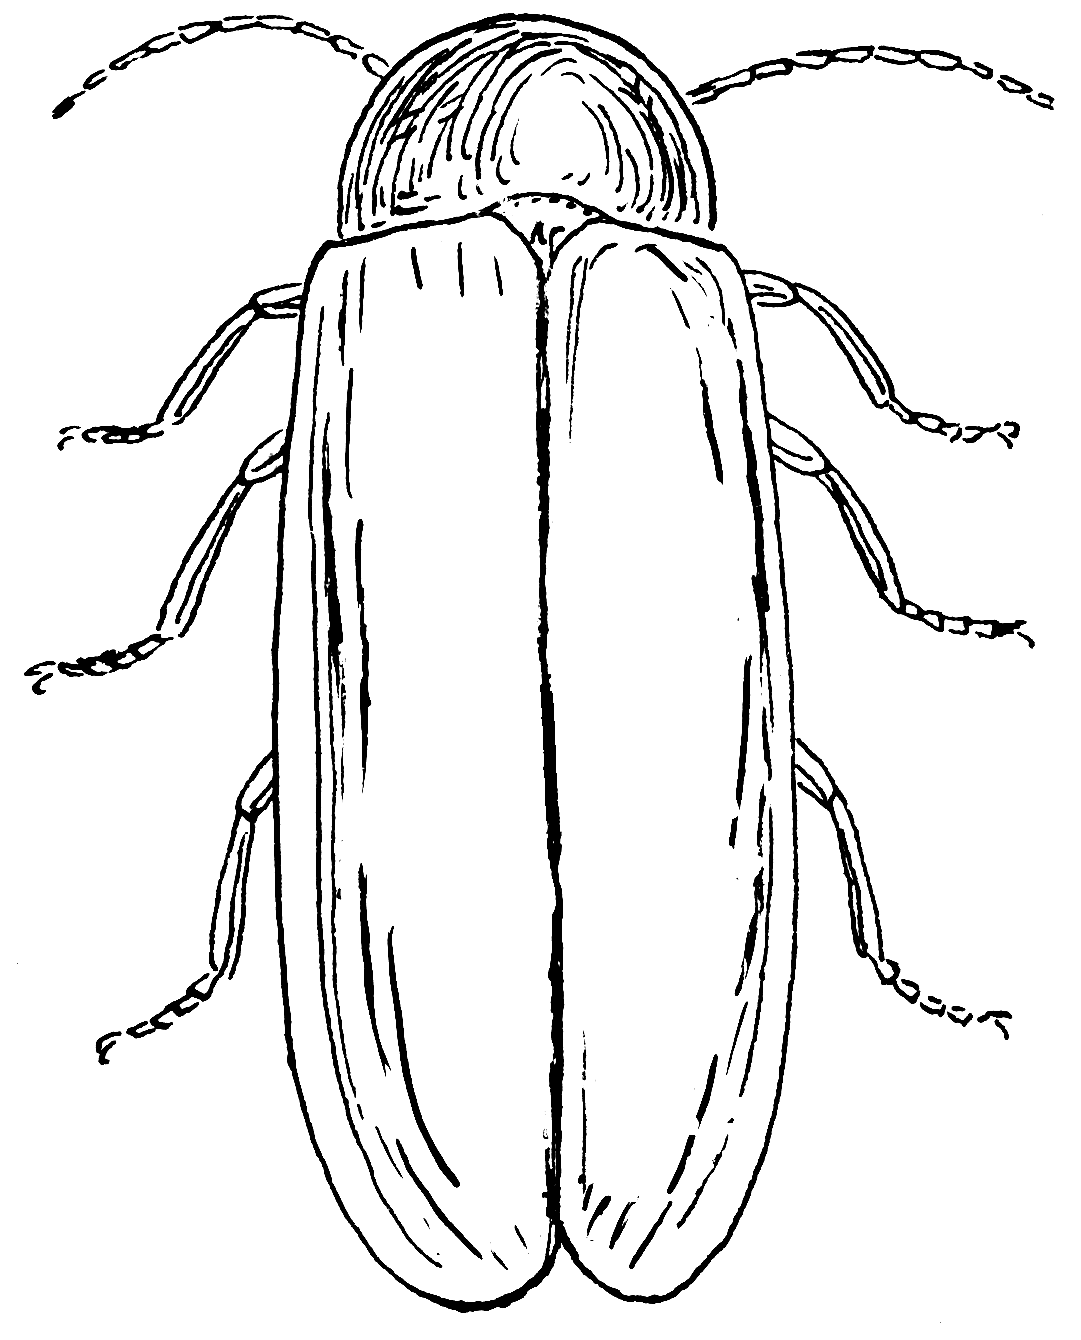 Lightning Bug Coloring Pages - AZ Coloring Pages